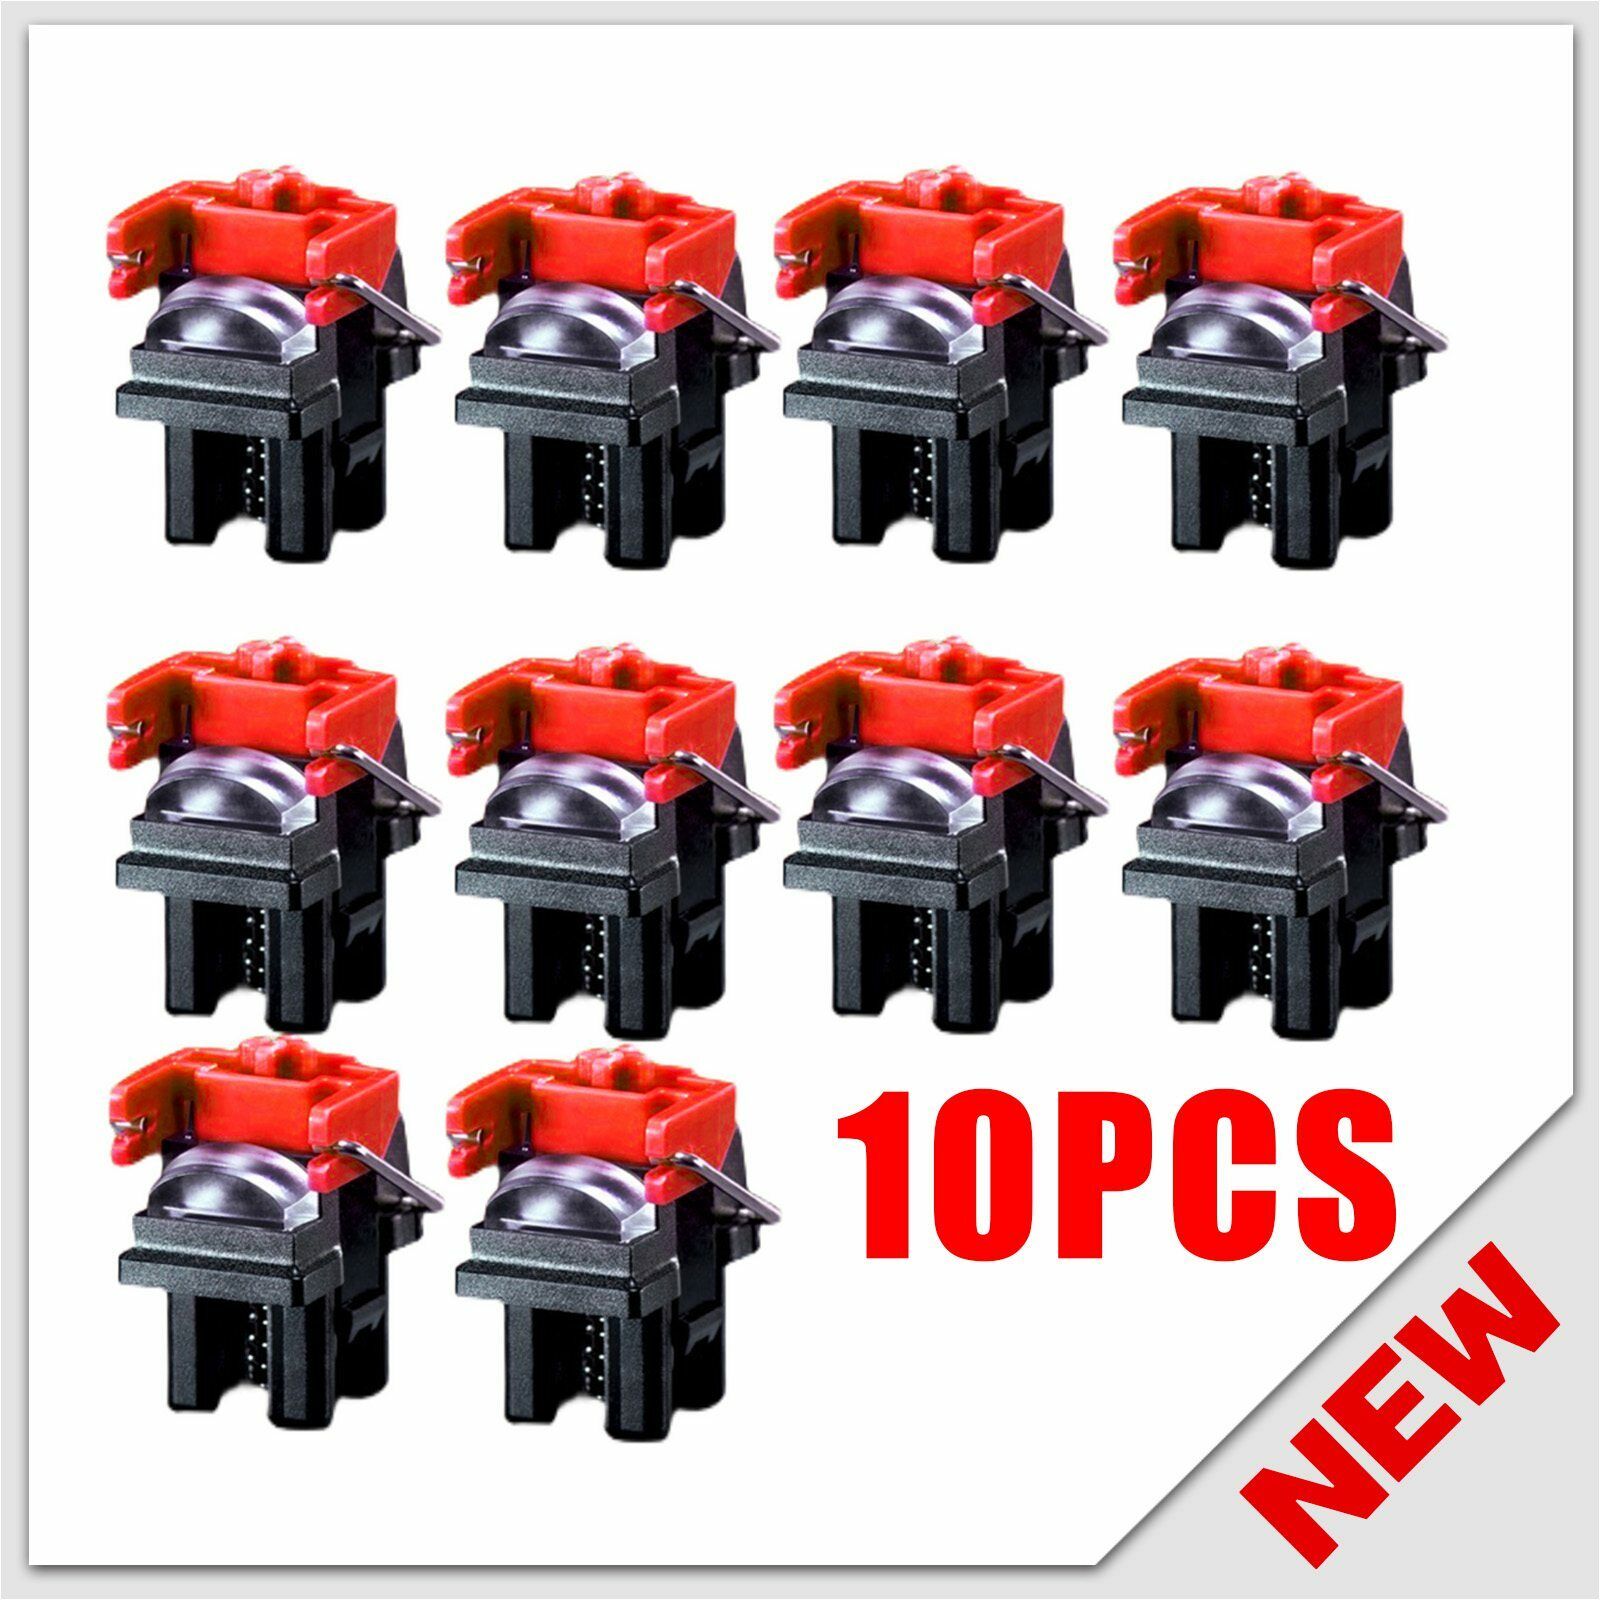 10pcs For Razer Linear Optical Red Mechanical Keyboard Switch Replacement